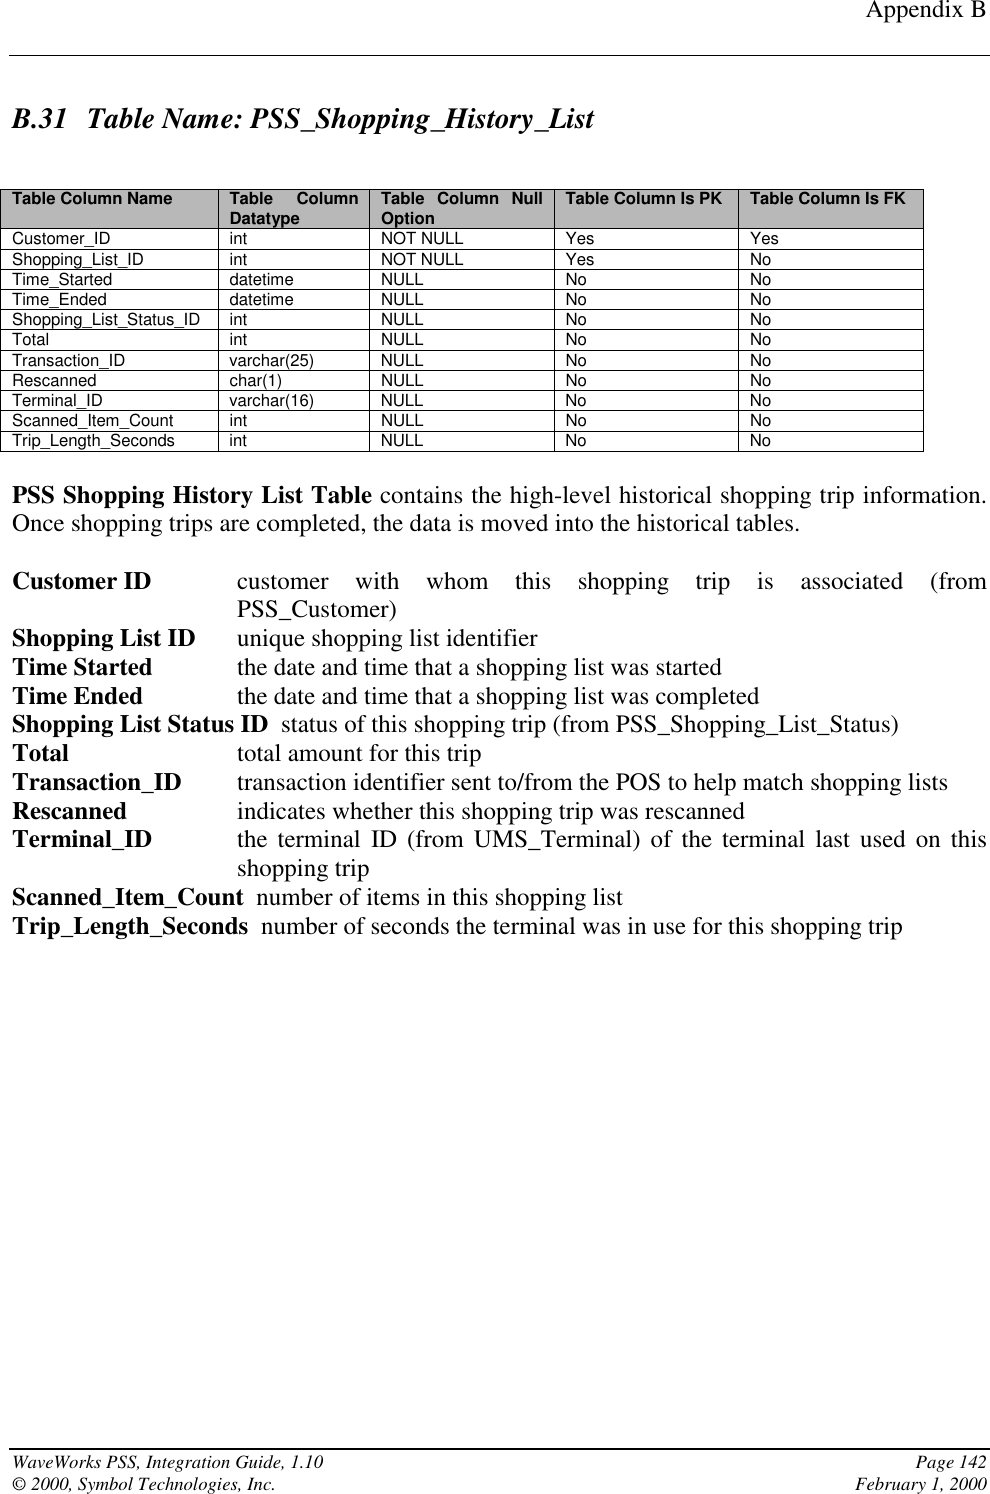 Appendix BWaveWorks PSS, Integration Guide, 1.10 Page 142© 2000, Symbol Technologies, Inc. February 1, 2000B.31 Table Name: PSS_Shopping_History_ListTable Column Name Table ColumnDatatype Table Column NullOption Table Column Is PK Table Column Is FKCustomer_ID int NOT NULL Yes YesShopping_List_ID int NOT NULL Yes NoTime_Started datetime NULL No NoTime_Ended datetime NULL No NoShopping_List_Status_ID int NULL No NoTotal int NULL No NoTransaction_ID varchar(25) NULL No NoRescanned char(1) NULL No NoTerminal_ID varchar(16) NULL No NoScanned_Item_Count int NULL No NoTrip_Length_Seconds int NULL No NoPSS Shopping History List Table contains the high-level historical shopping trip information.Once shopping trips are completed, the data is moved into the historical tables.Customer ID customer with whom this shopping trip is associated (fromPSS_Customer)Shopping List ID unique shopping list identifierTime Started the date and time that a shopping list was startedTime Ended the date and time that a shopping list was completedShopping List Status ID  status of this shopping trip (from PSS_Shopping_List_Status)Total total amount for this tripTransaction_ID transaction identifier sent to/from the POS to help match shopping listsRescanned indicates whether this shopping trip was rescanned            Terminal_ID the terminal ID (from UMS_Terminal) of the terminal last used on thisshopping tripScanned_Item_Count  number of items in this shopping listTrip_Length_Seconds  number of seconds the terminal was in use for this shopping trip